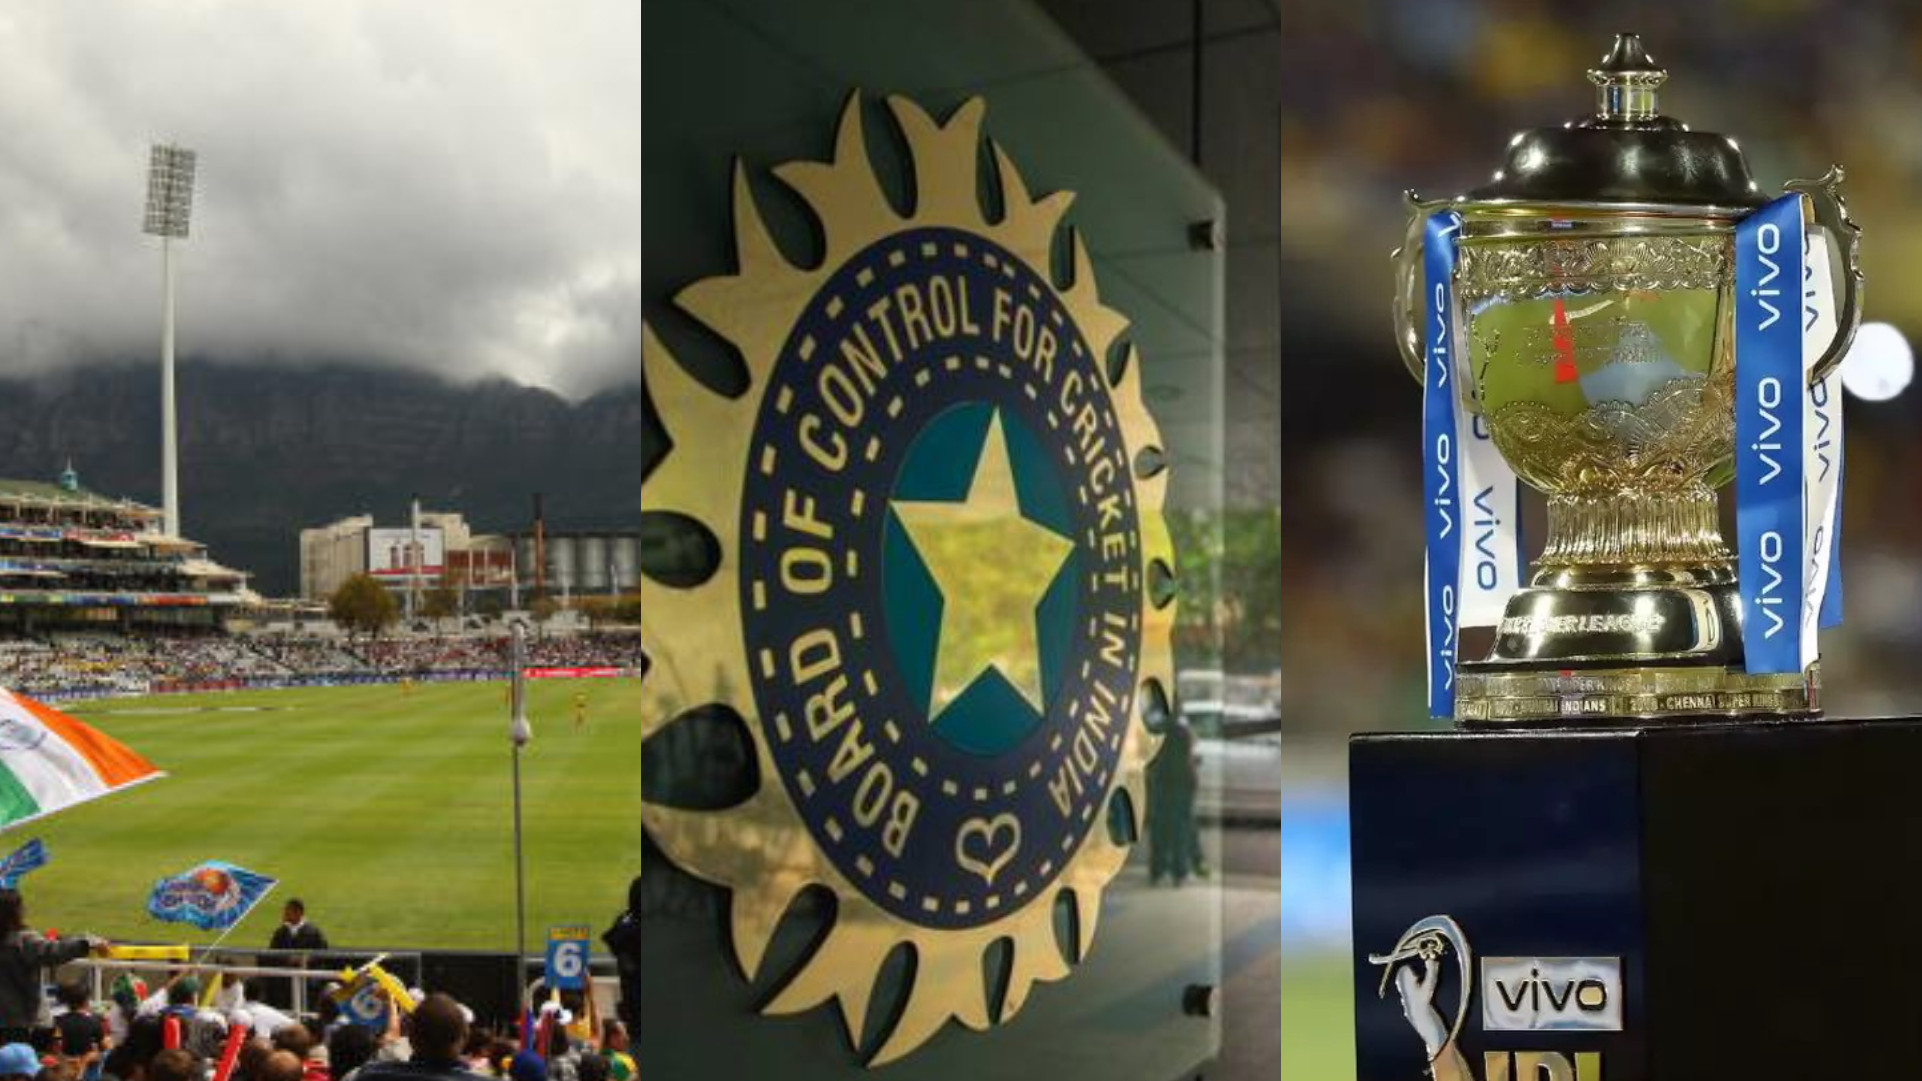 IPL 2022: BCCI seeing South Africa or Sri Lanka as backup options, if COVID situation worsens in India- Report